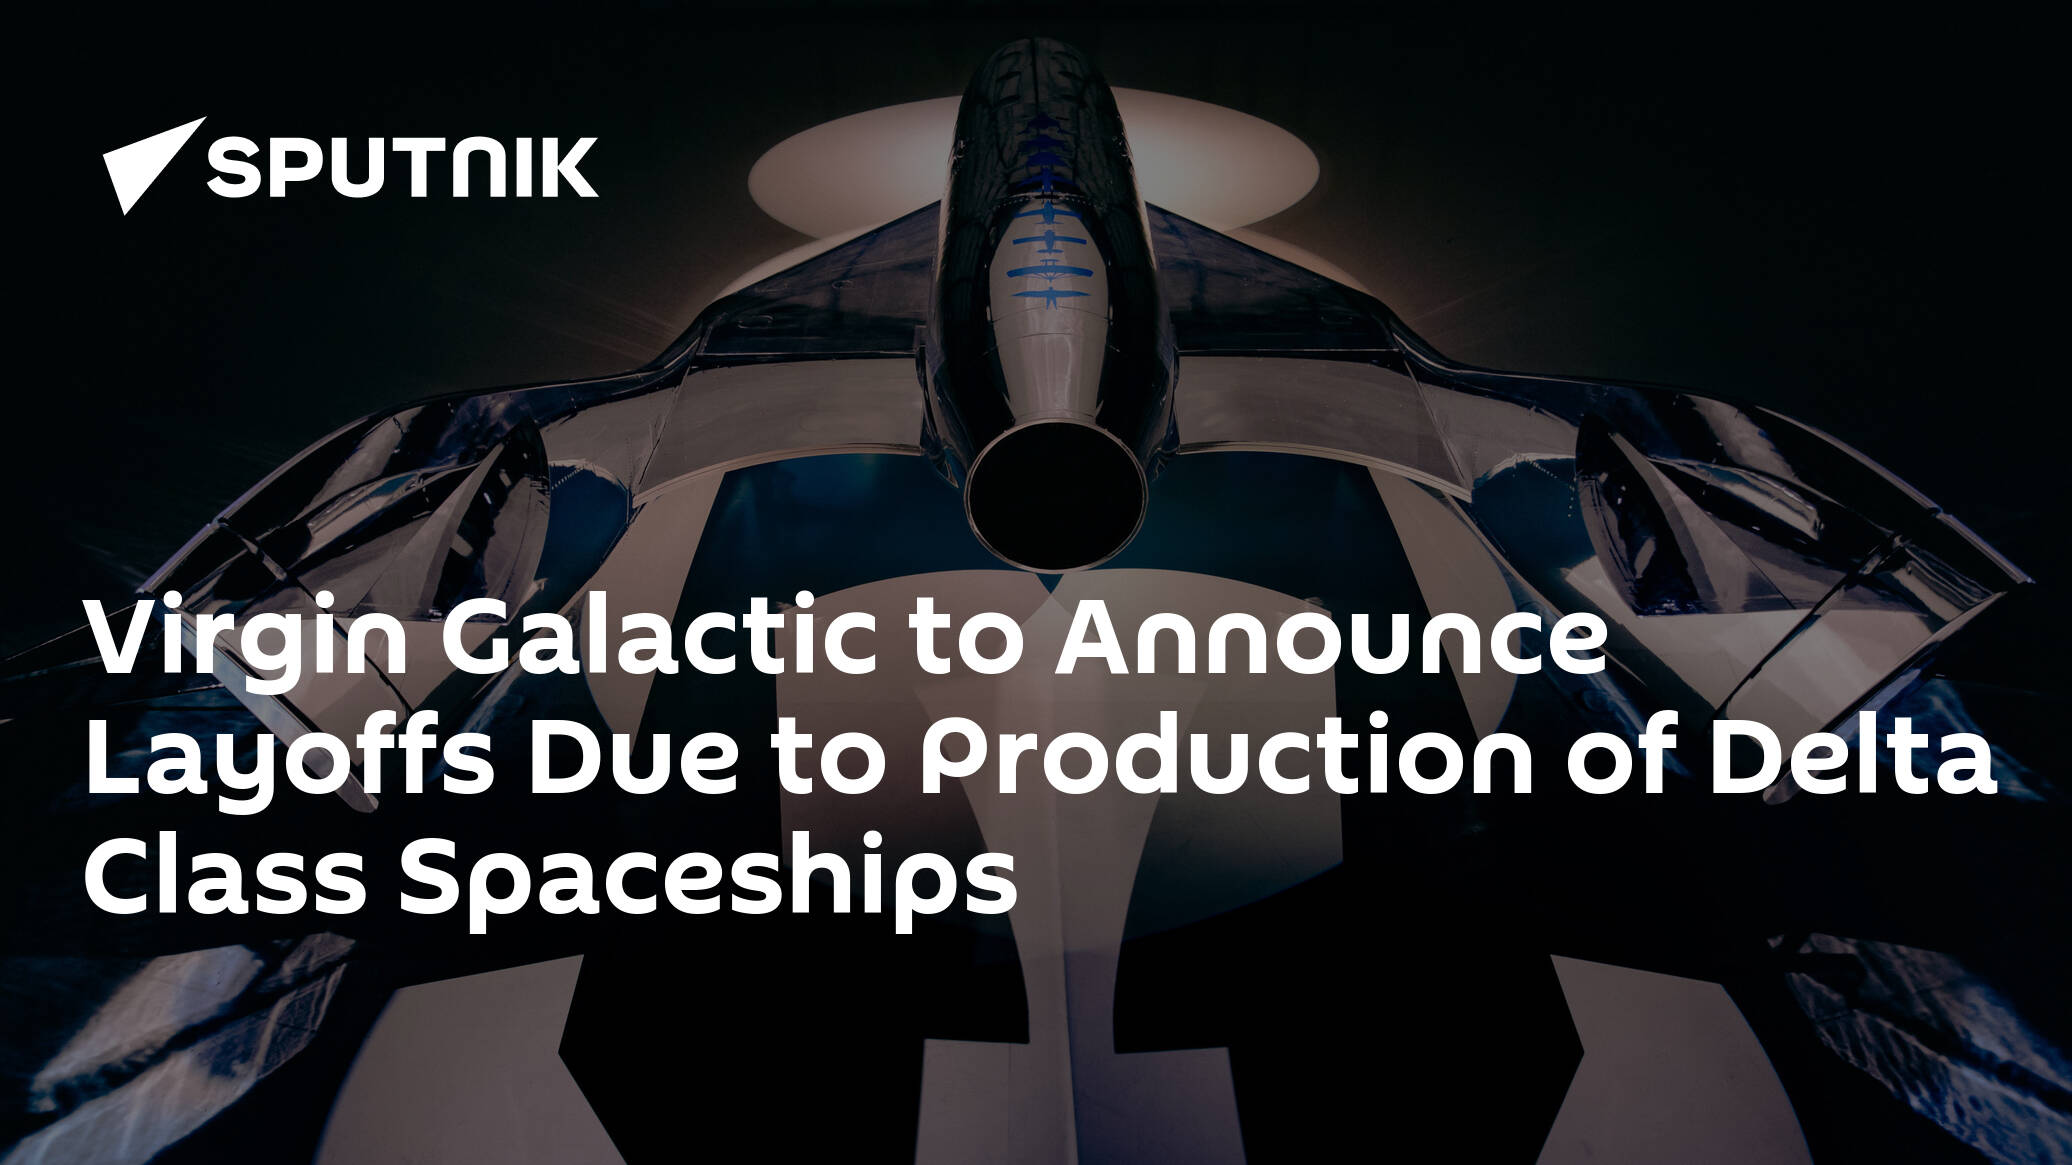 Virgin Galactic to Announce Layoffs Due to Production of Delta Class Spaceships